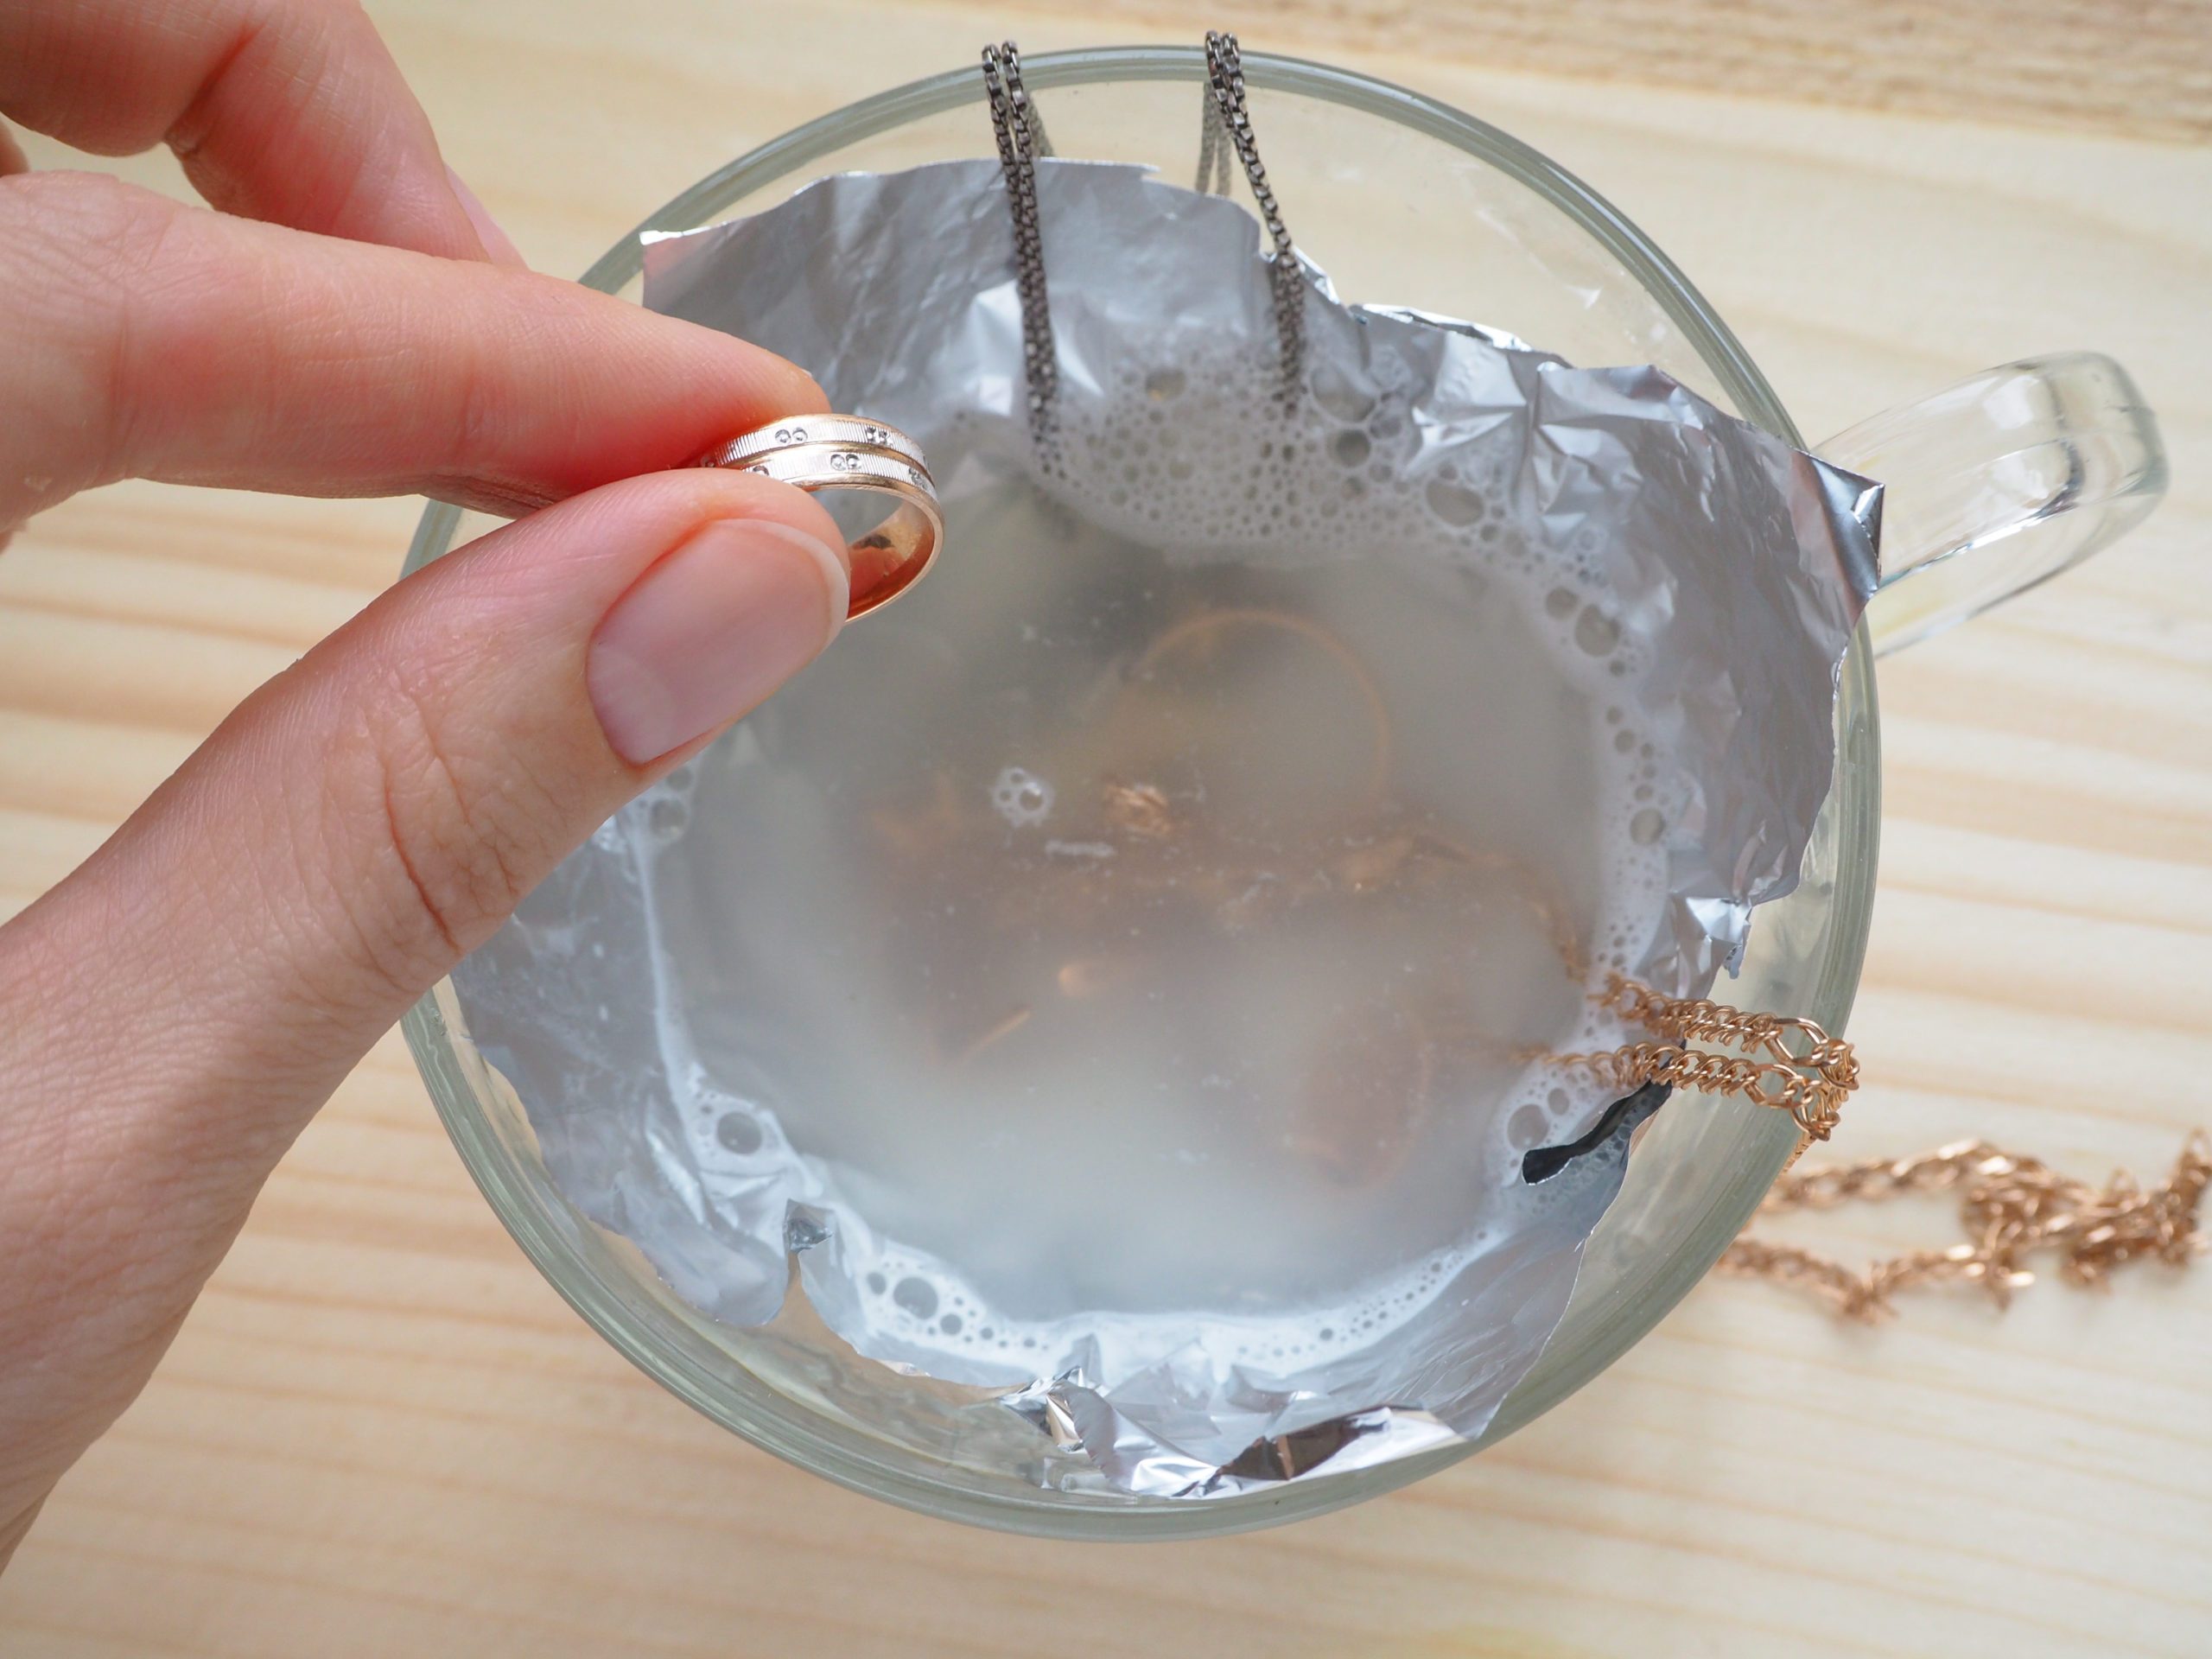 How to Clean Silver Jewelry at Home Easily 